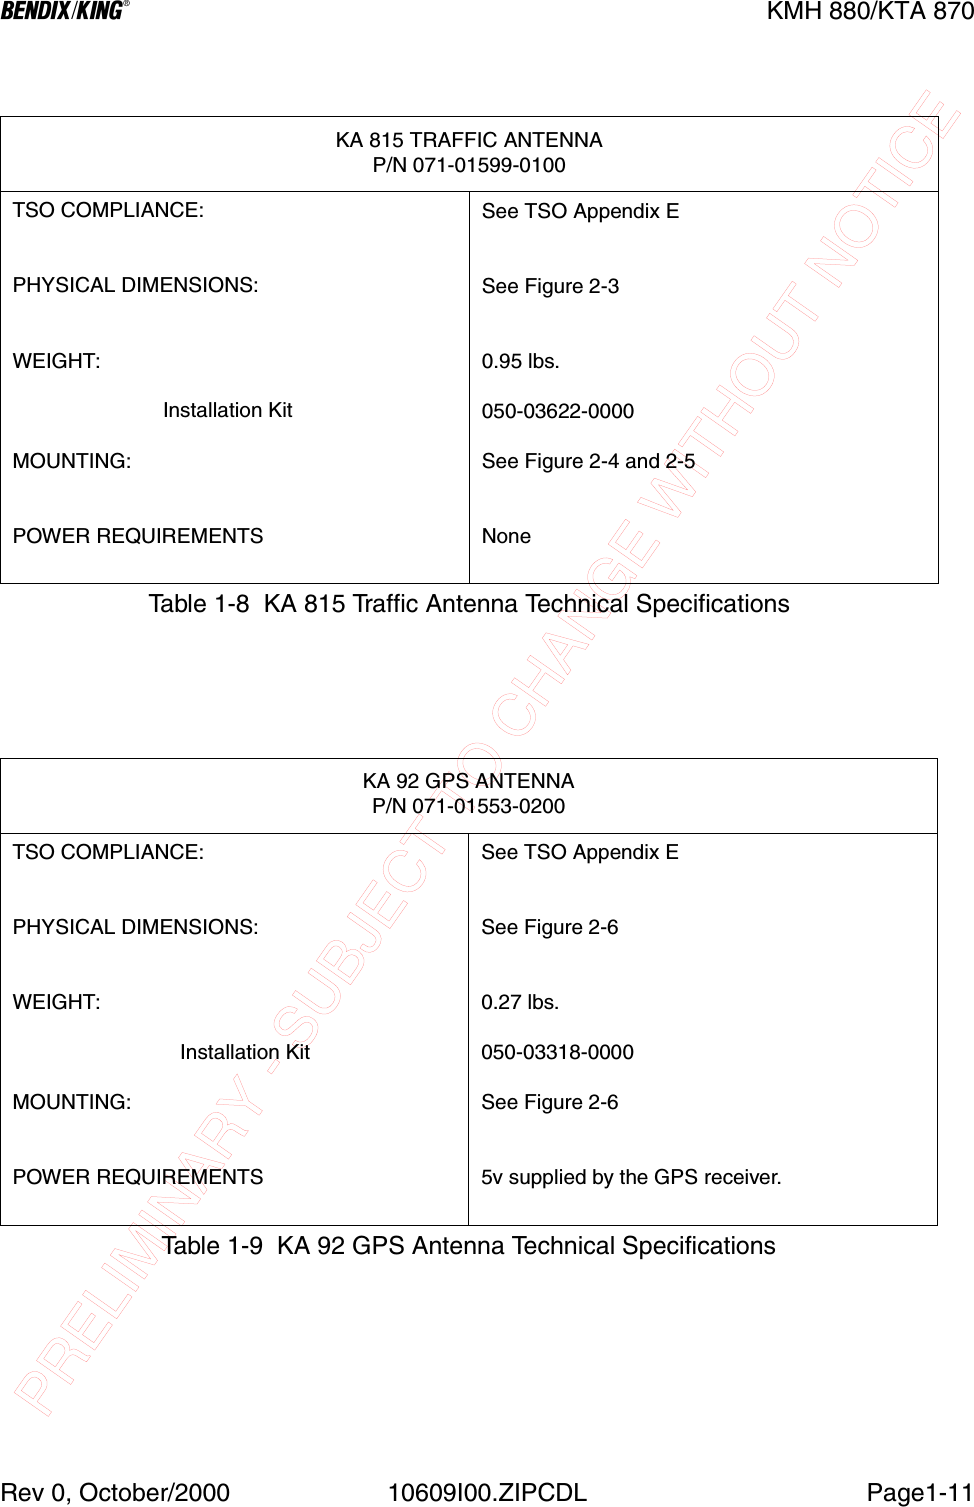 PRELIMINARY - SUBJECT TO CHANGE WITHOUT NOTICEBKMH 880/KTA 870Rev 0, October/2000 10609I00.ZIPCDL Page1-11KA 815 TRAFFIC ANTENNAP/N 071-01599-0100TSO COMPLIANCE:PHYSICAL DIMENSIONS:WEIGHT:                          Installation KitMOUNTING:POWER REQUIREMENTSSee TSO Appendix ESee Figure 2-30.95 lbs.050-03622-0000See Figure 2-4 and 2-5NoneTable 1-8  KA 815 Traffic Antenna Technical SpecificationsKA 92 GPS ANTENNAP/N 071-01553-0200TSO COMPLIANCE:PHYSICAL DIMENSIONS:WEIGHT:                             Installation KitMOUNTING:POWER REQUIREMENTSSee TSO Appendix ESee Figure 2-60.27 lbs.050-03318-0000See Figure 2-6 5v supplied by the GPS receiver.Table 1-9  KA 92 GPS Antenna Technical Specifications